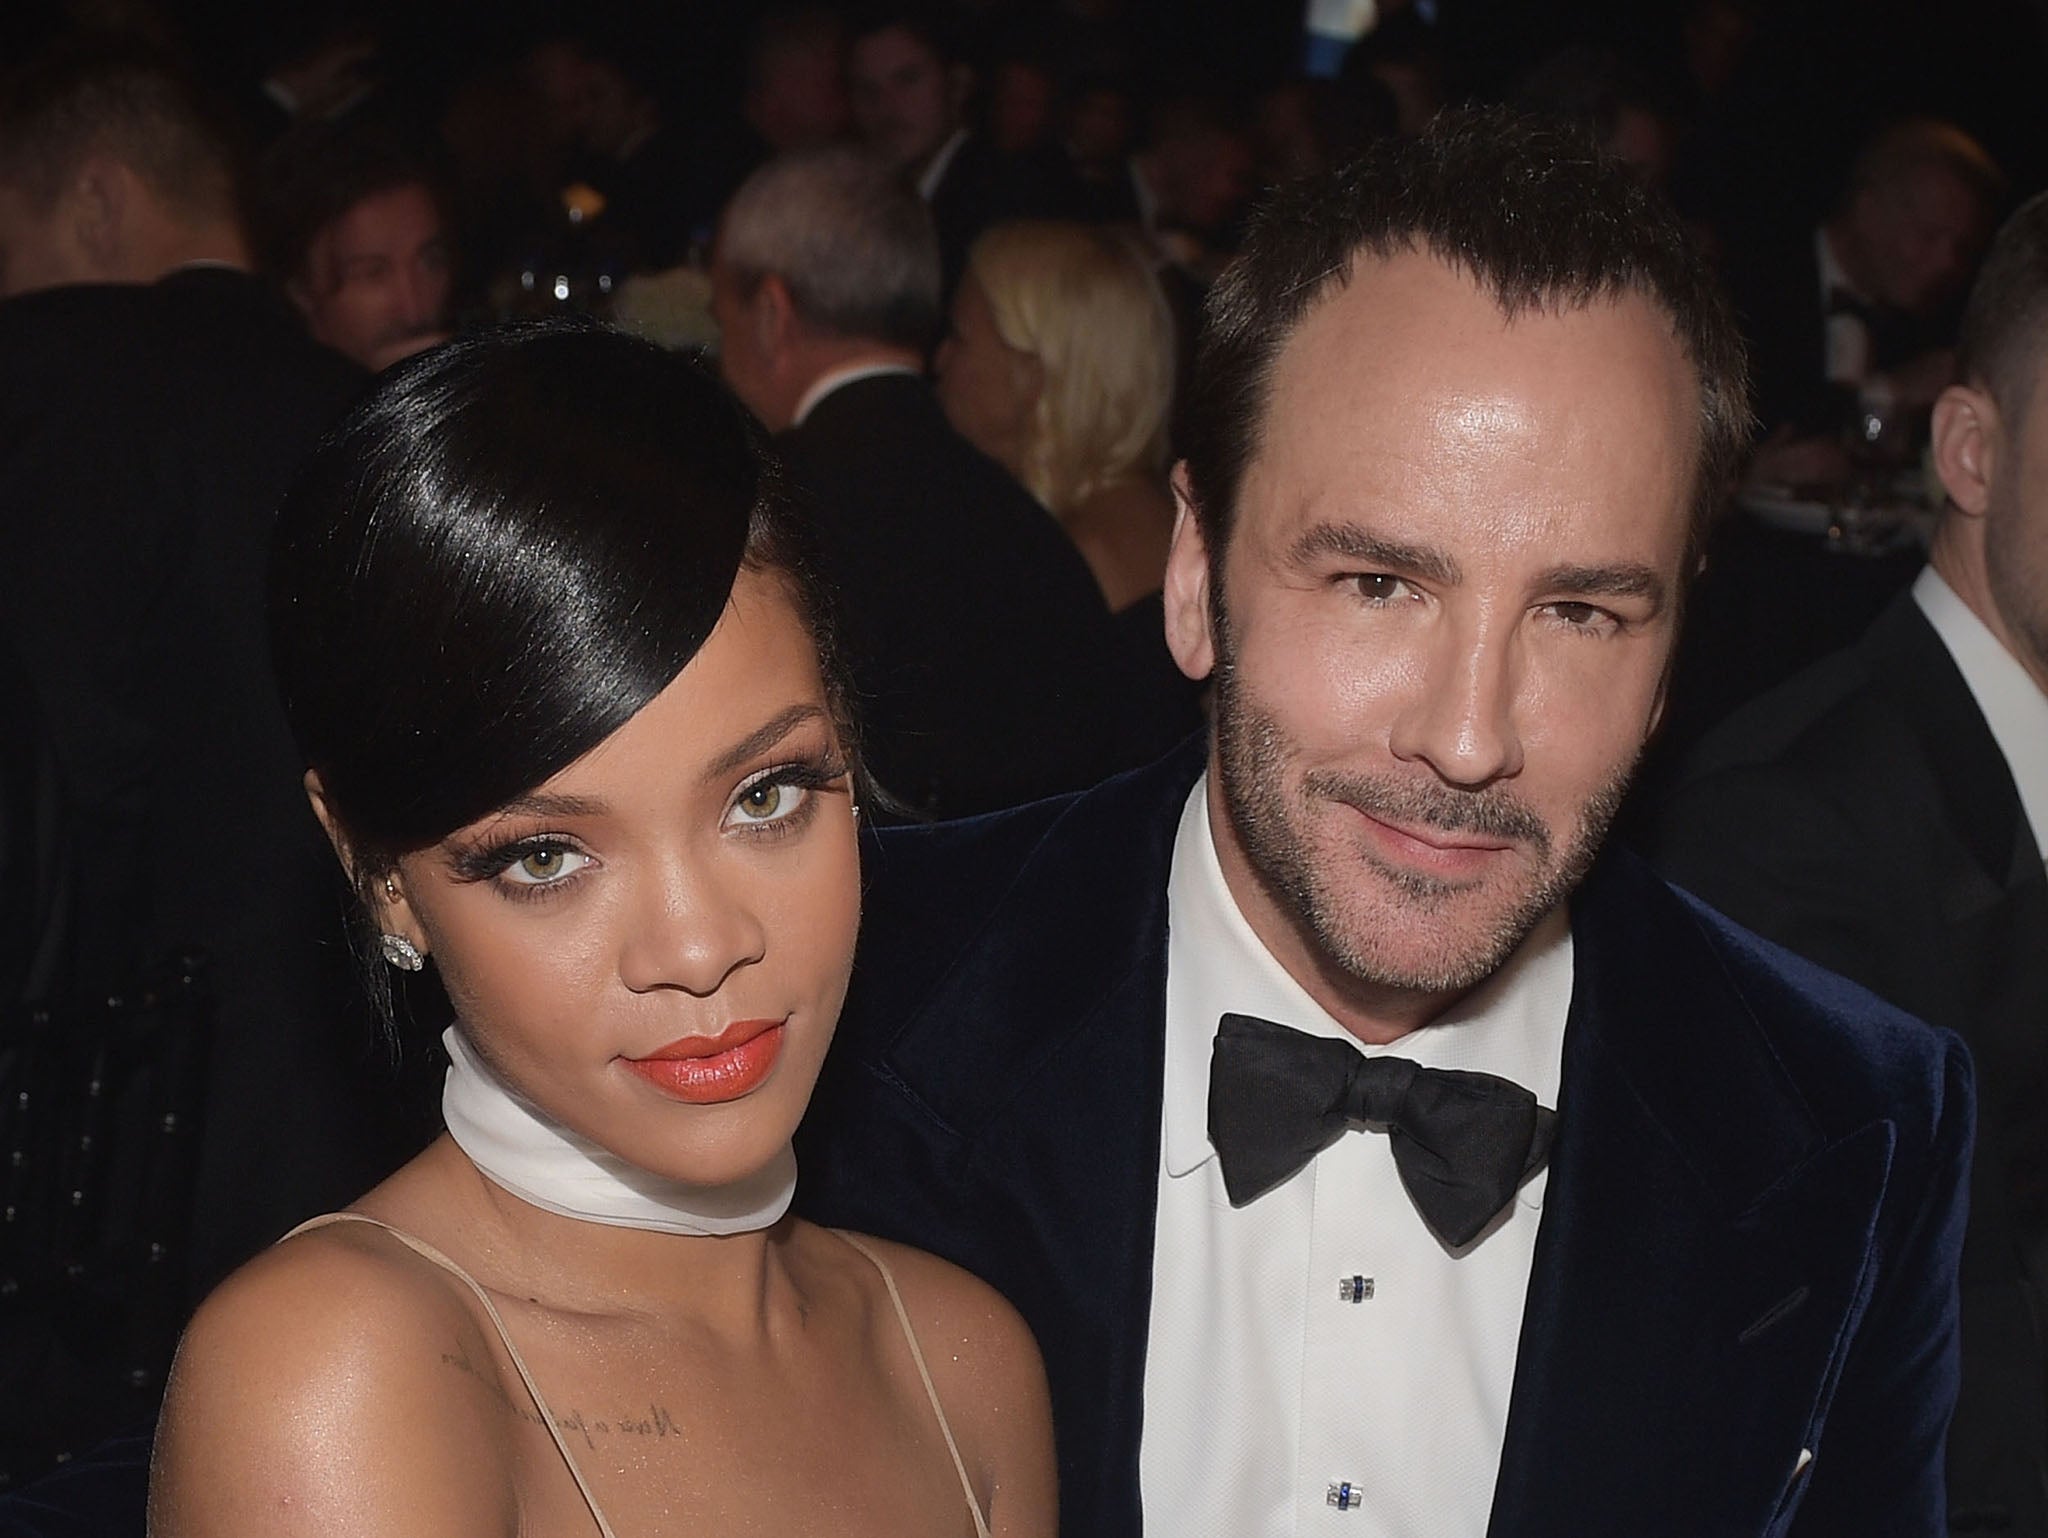 Rihanna and Tom Ford at the amFAR Inspiration Gala in Los Angeles 2014